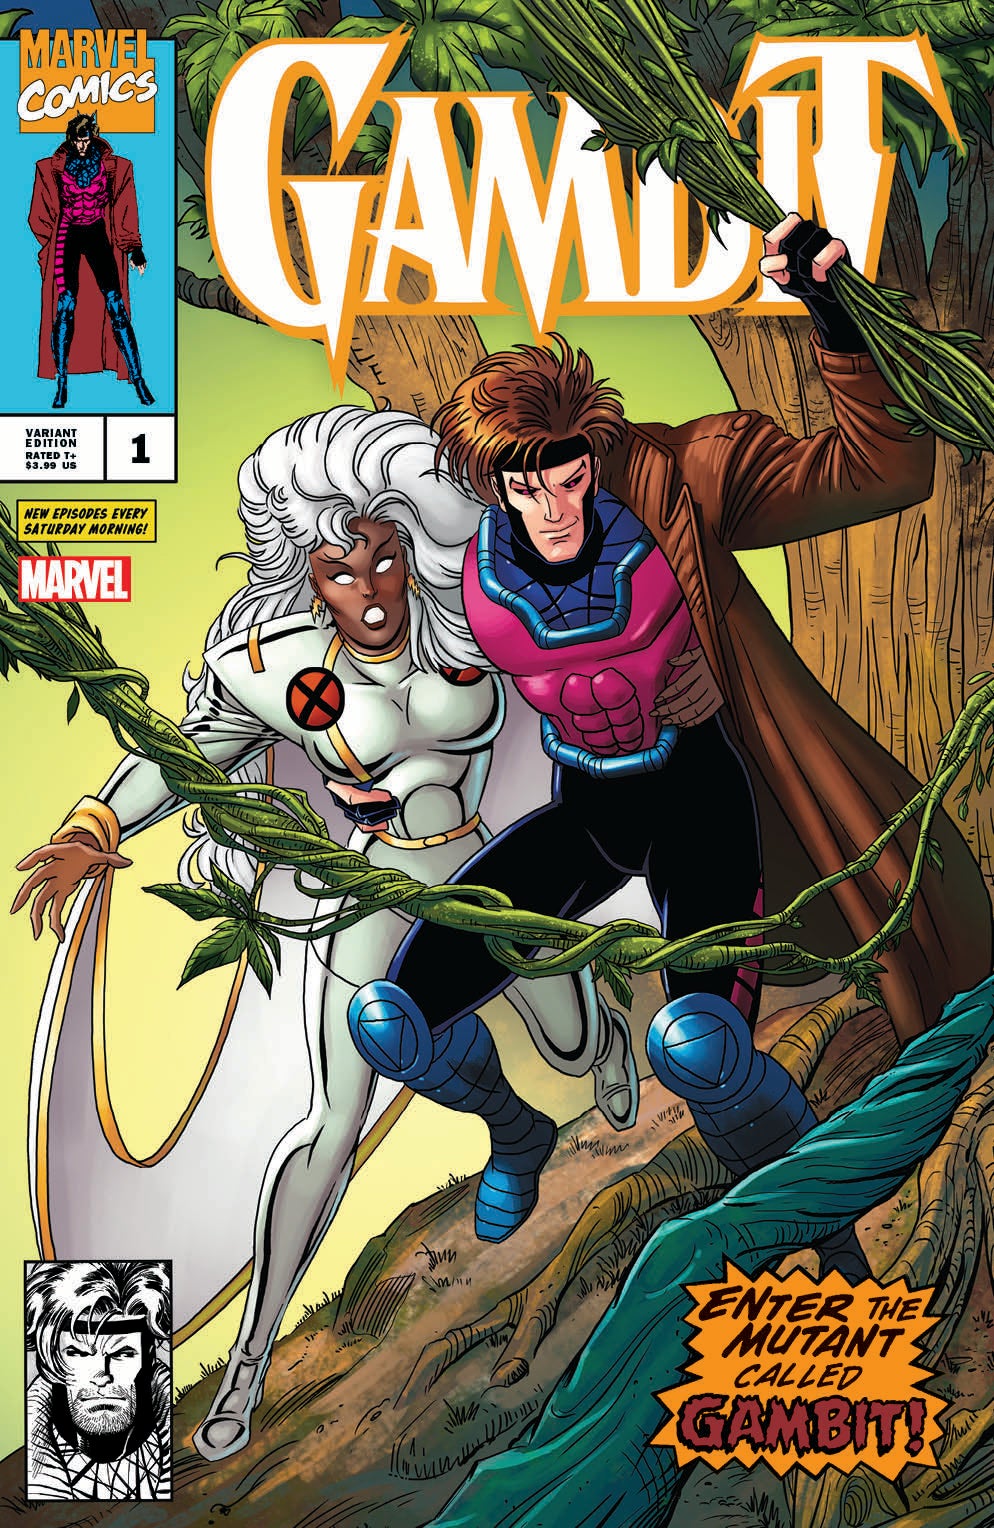 Gambit's 30th Anniversary Issue by Gambit New Orleans - Issuu